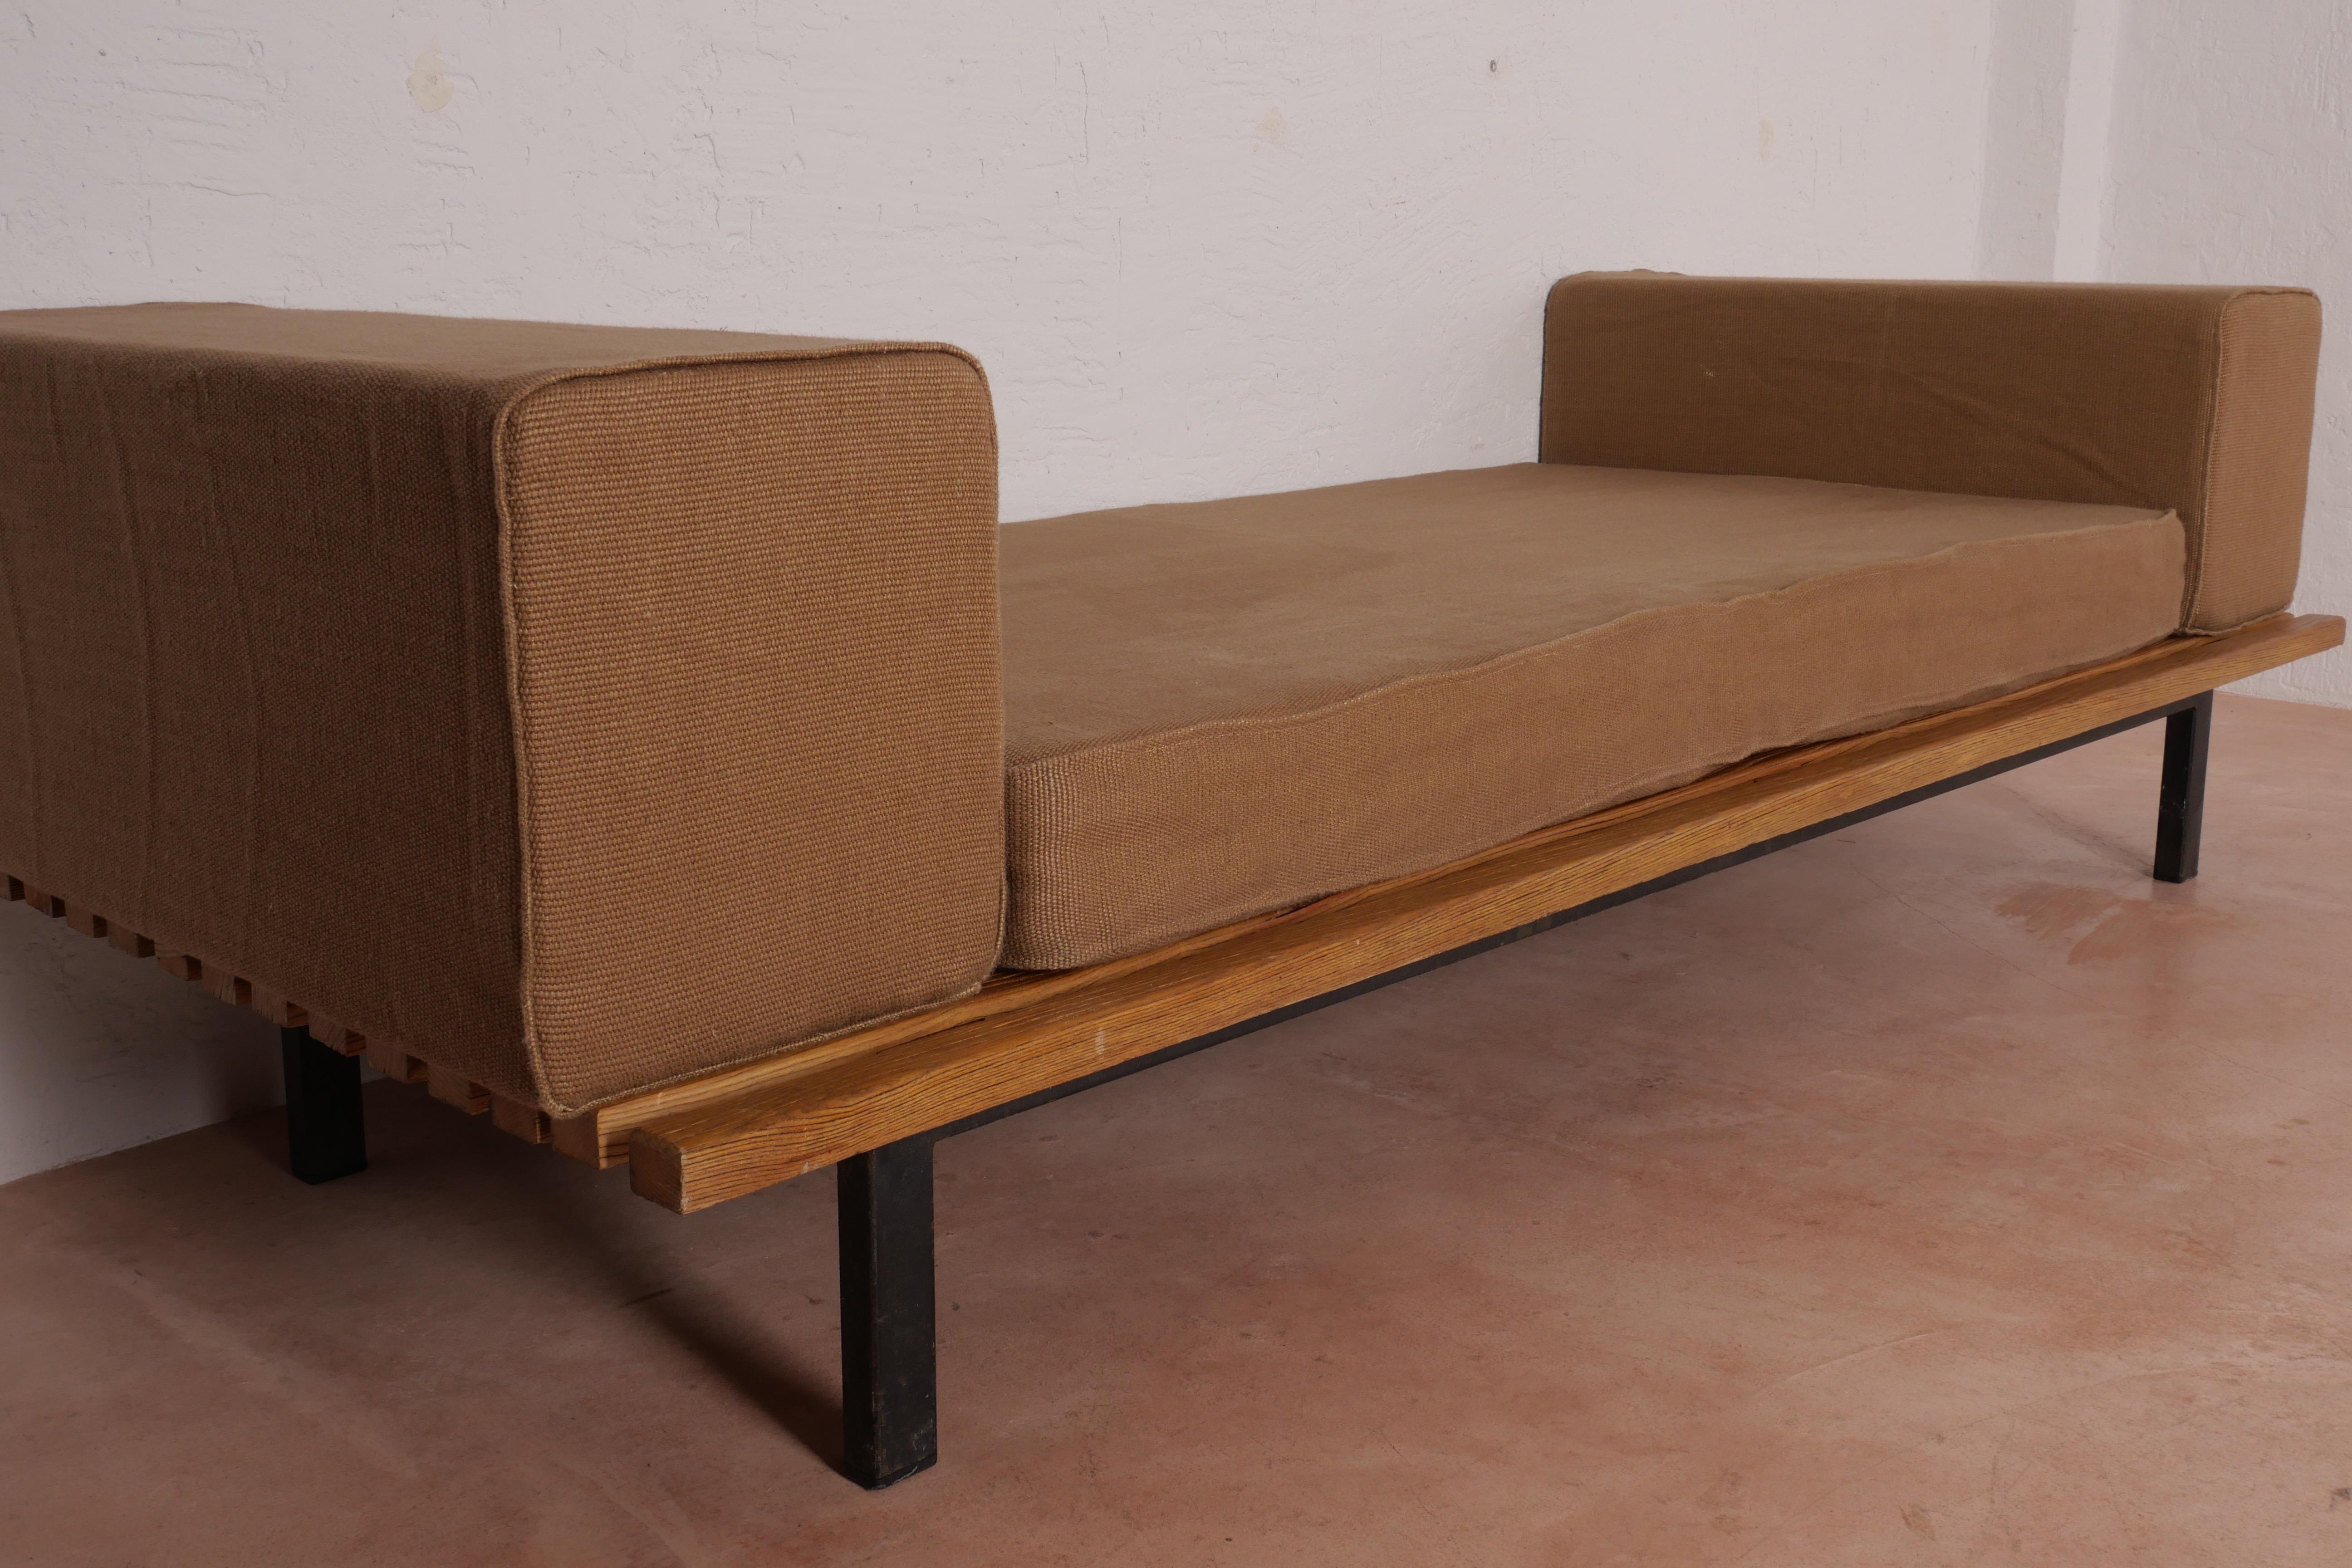 Mauritanian Charlotte Perriand Cansado Bench in Ash, circa 1959 - 1967 For Sale